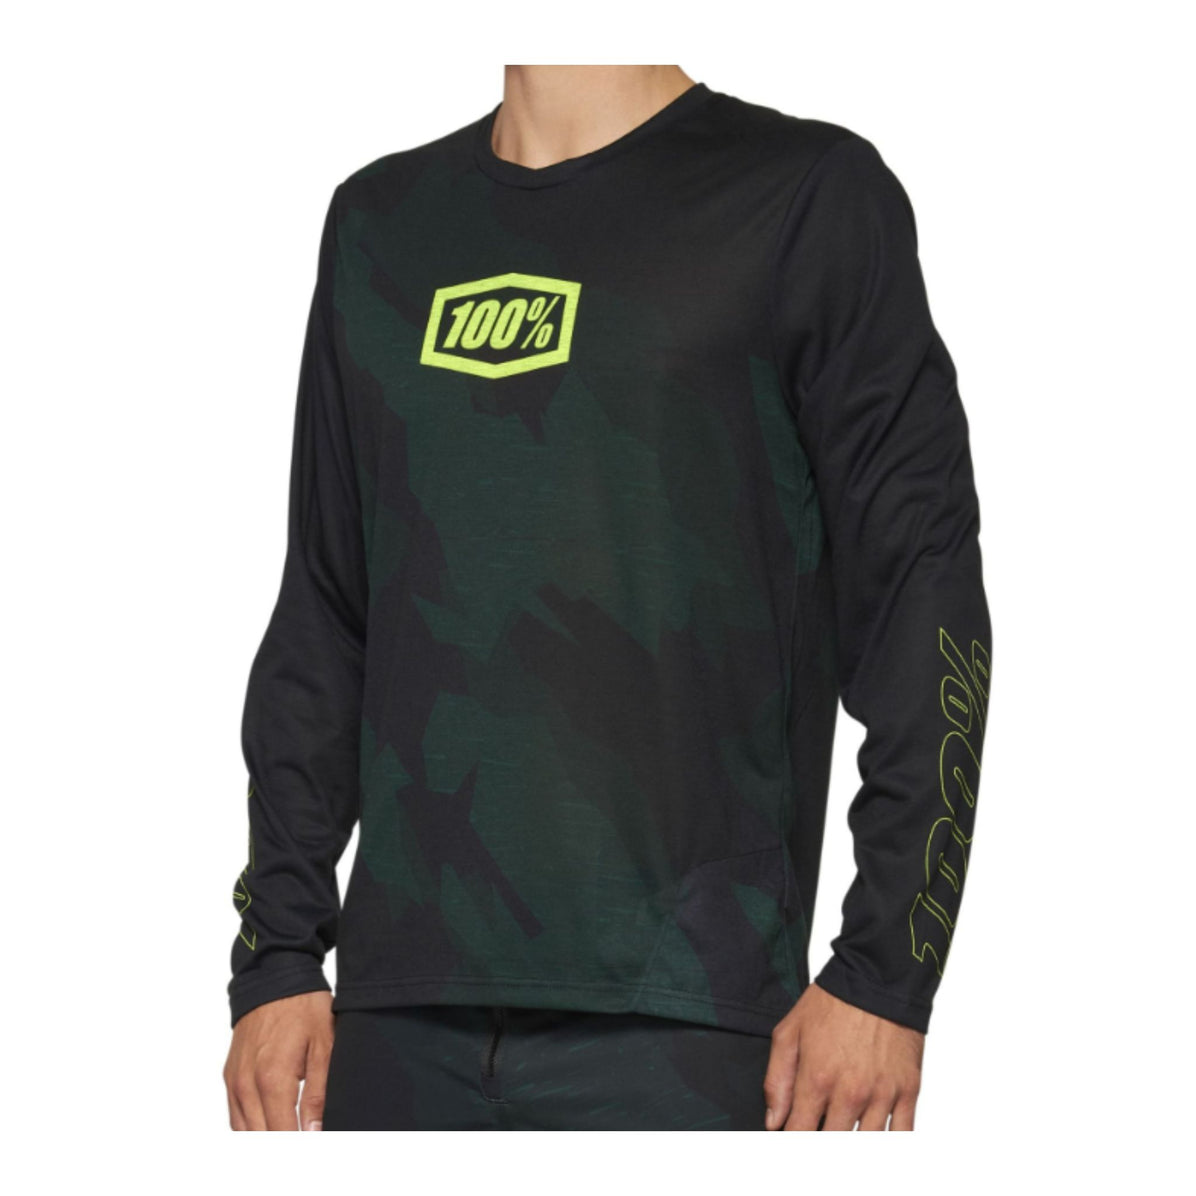 100% Airmatic Long Sleeve Limited Edition Jersey